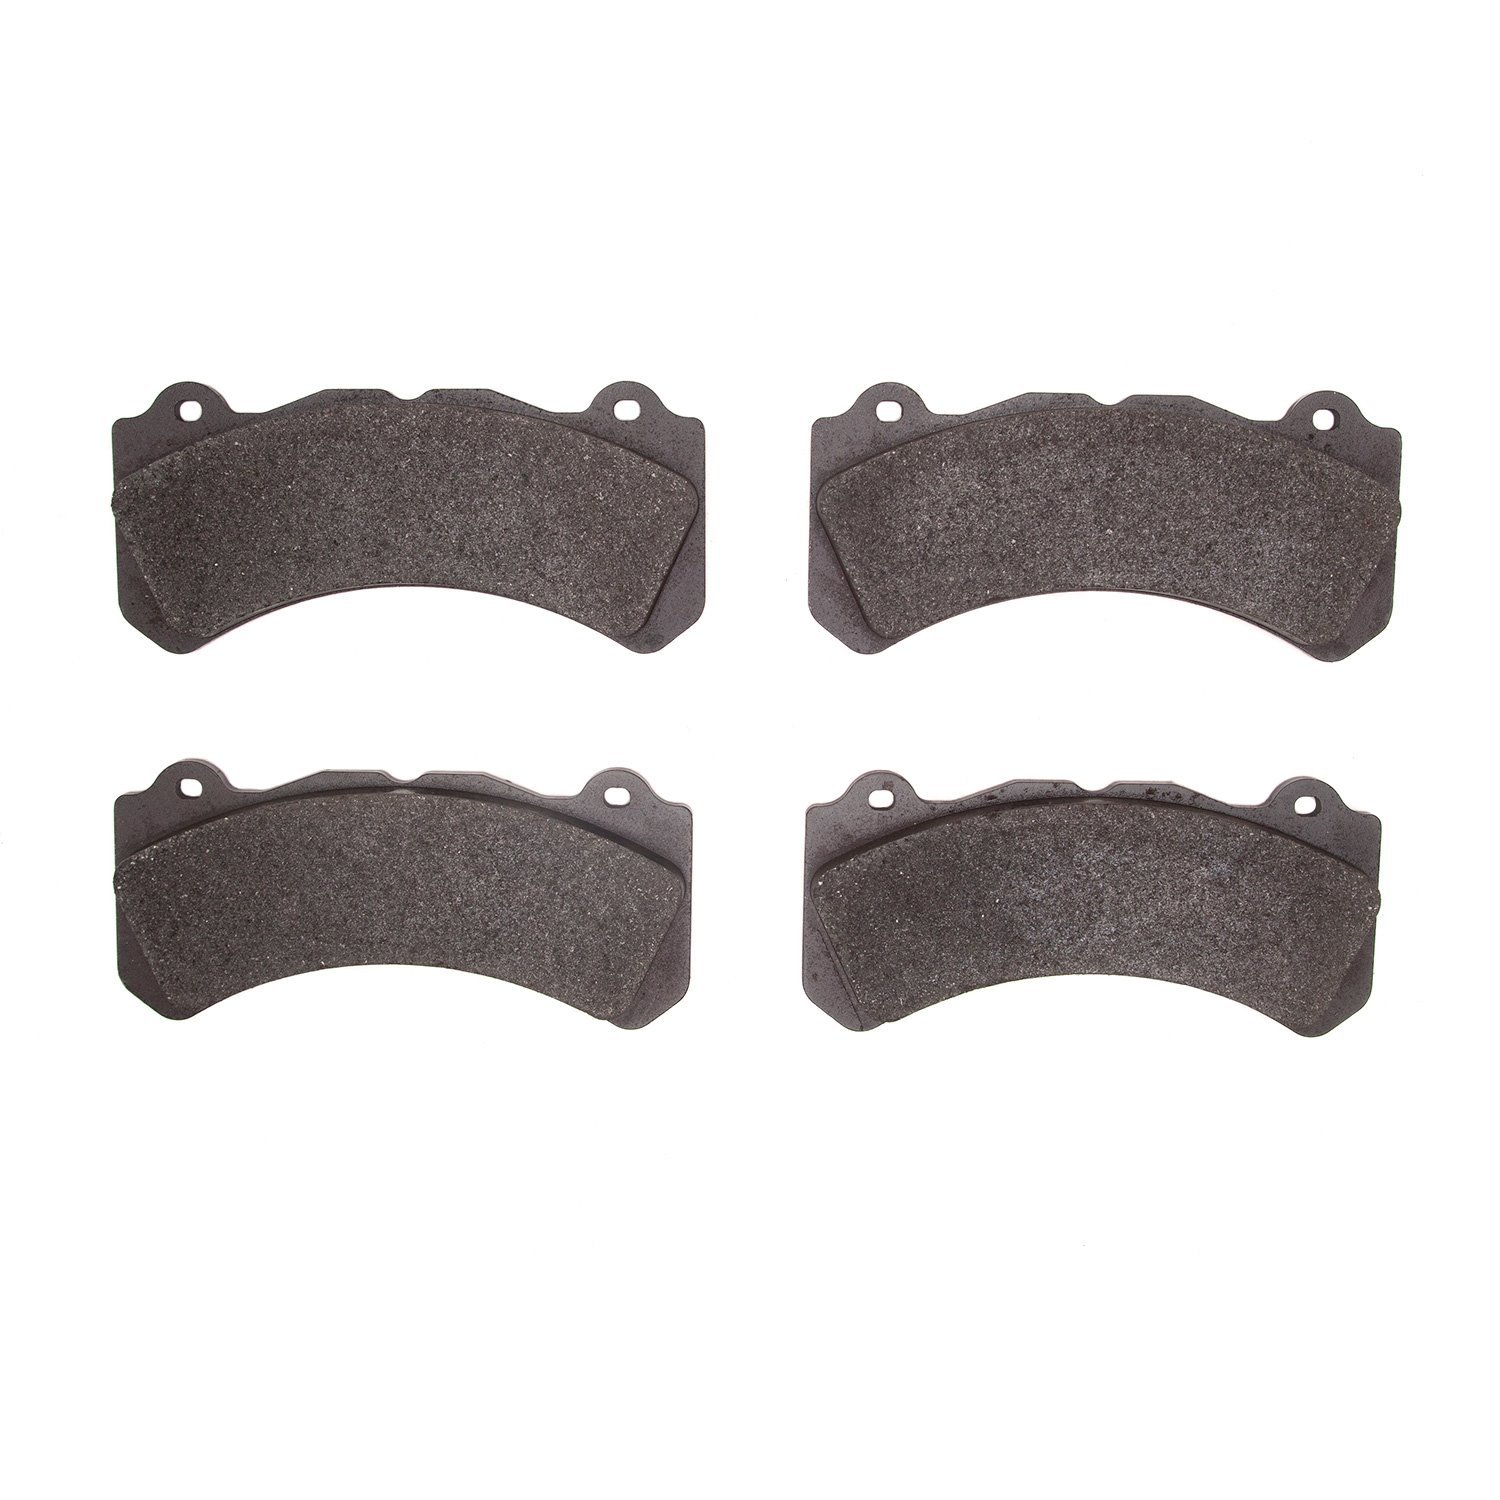 Ceramic Brake Pads, Fits Select Volvo, Position: Front